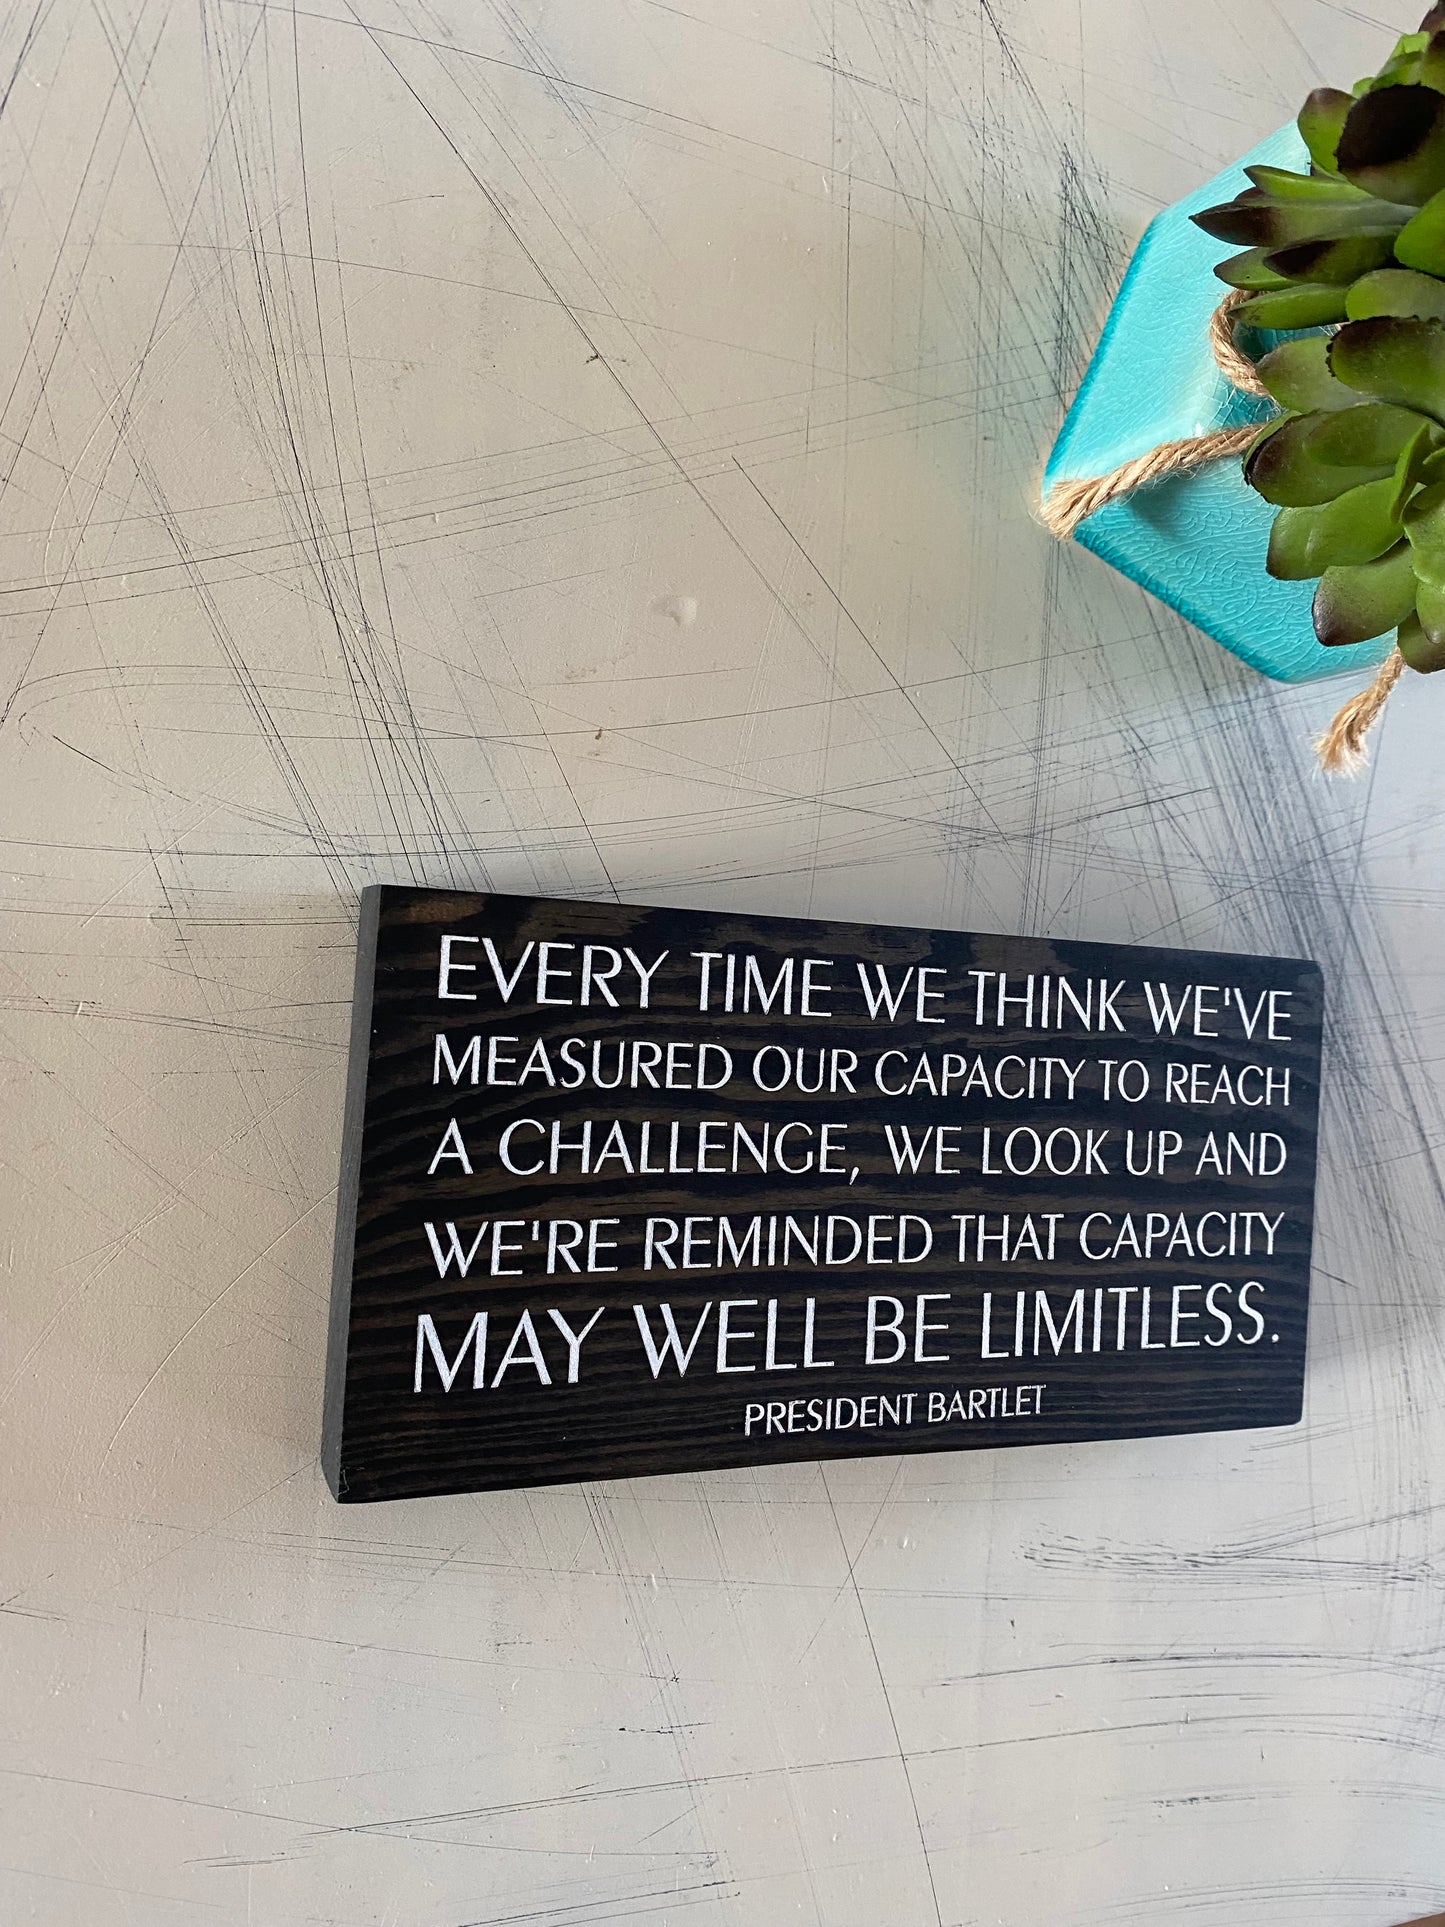 We look up and we're reminded that capacity may well be limitless. - handmade mini wood sign